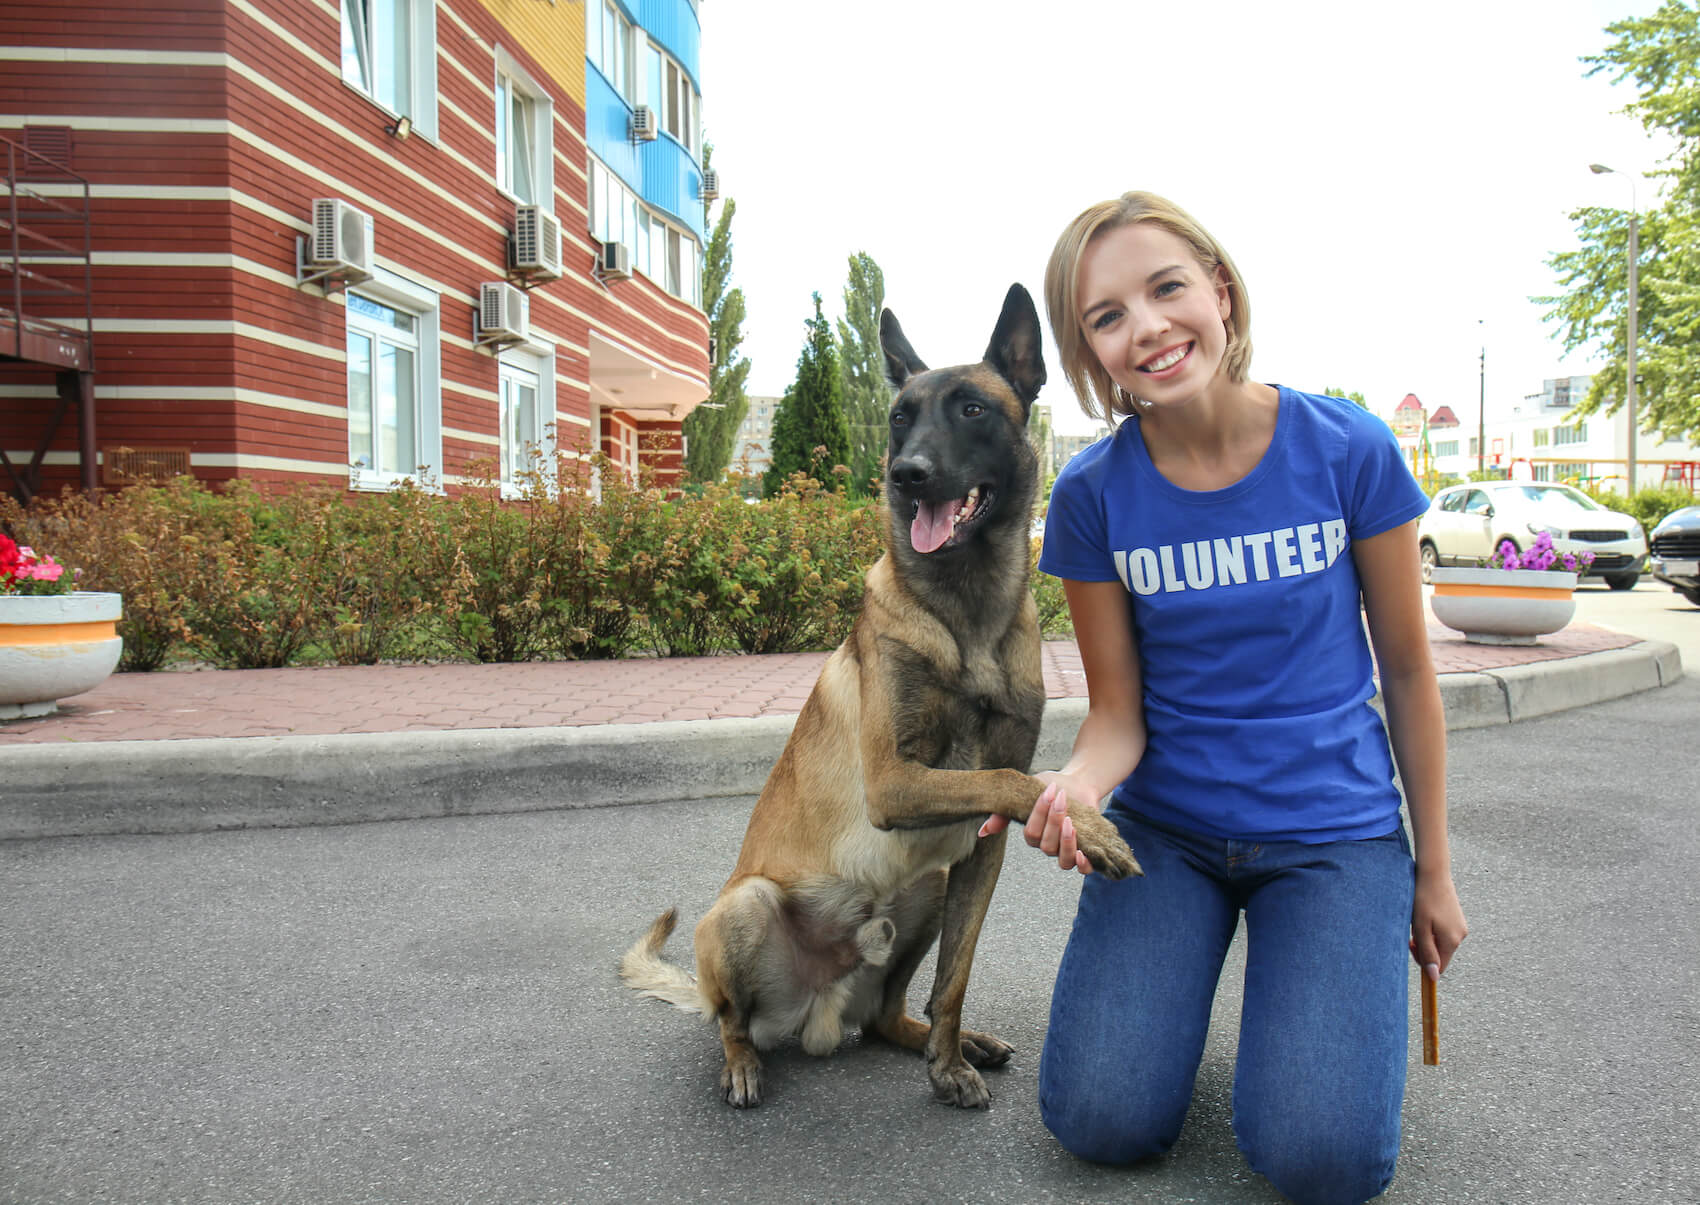 About Kind Hands 4 Paws